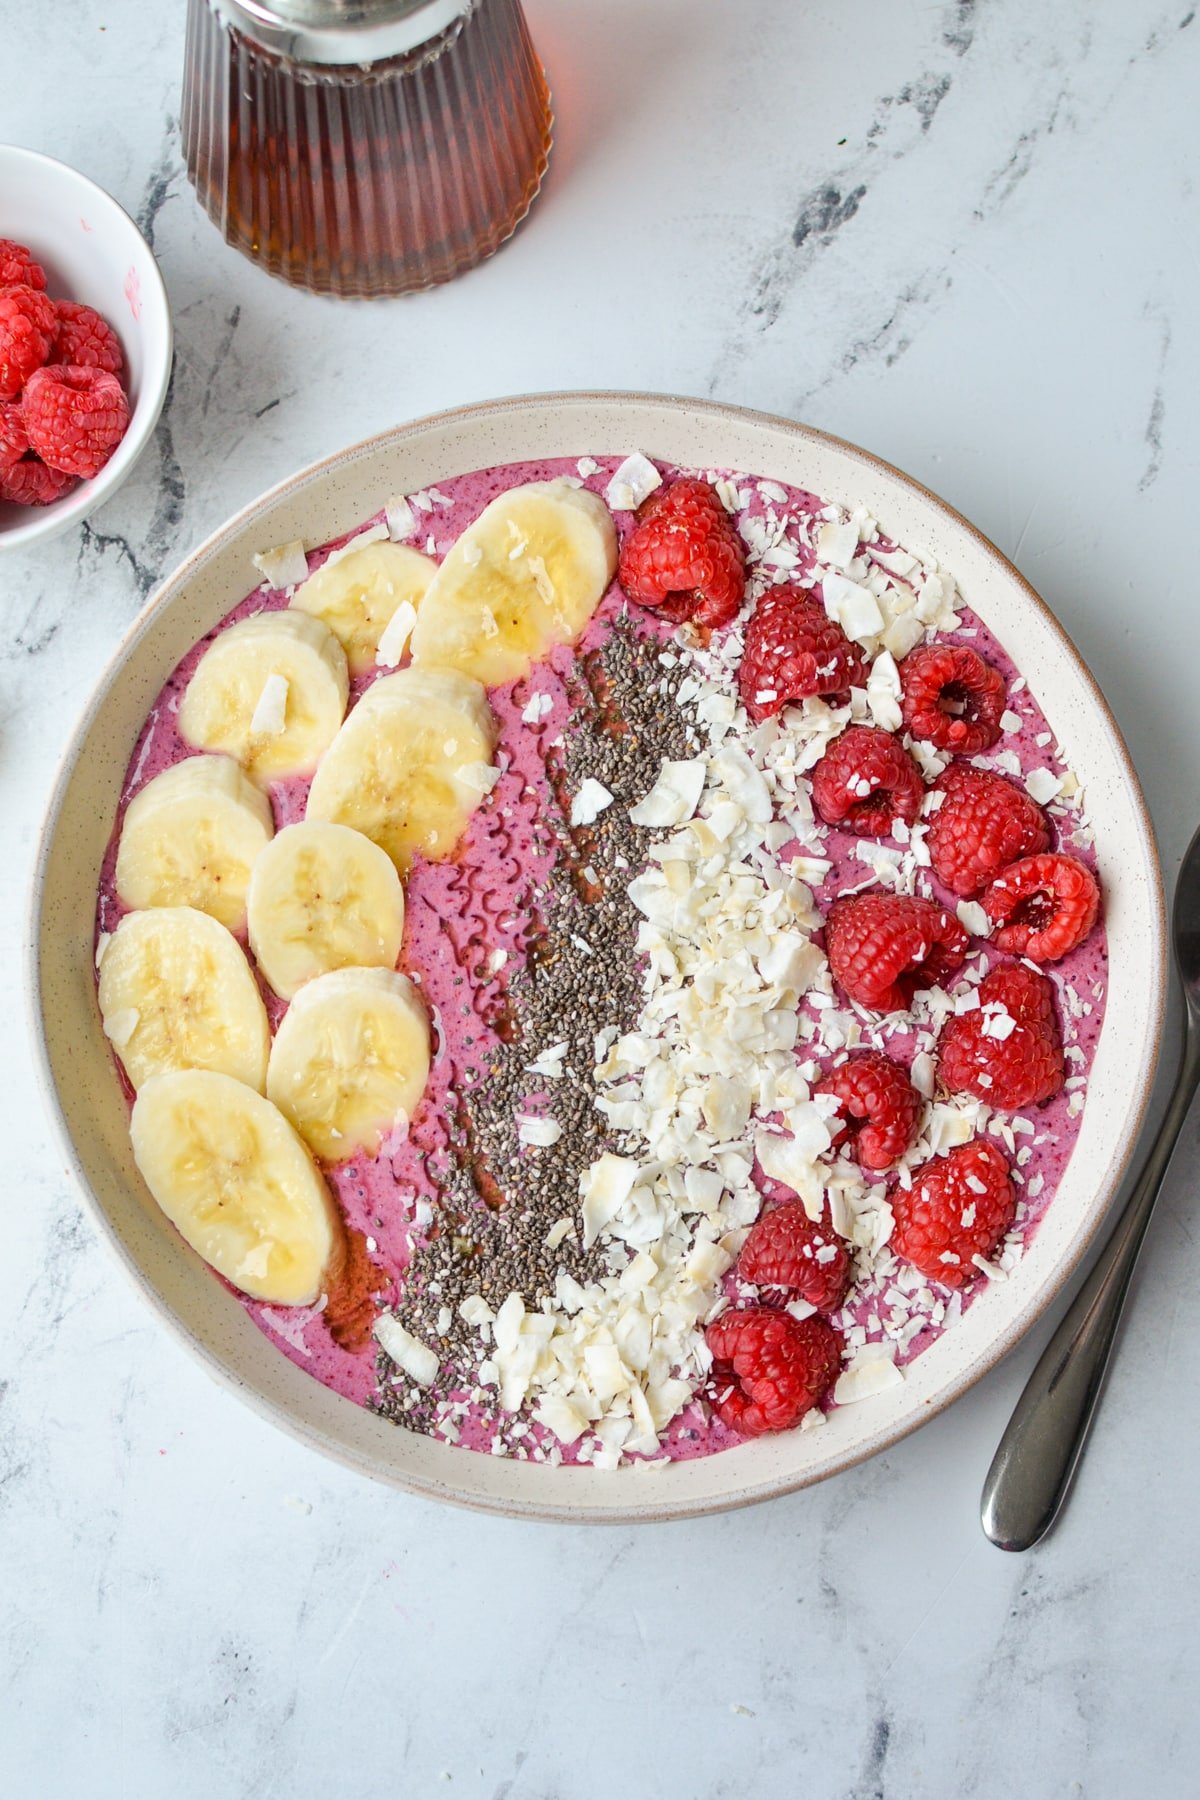 A smoothie bowl, topped with fruit, chia, and coconut.